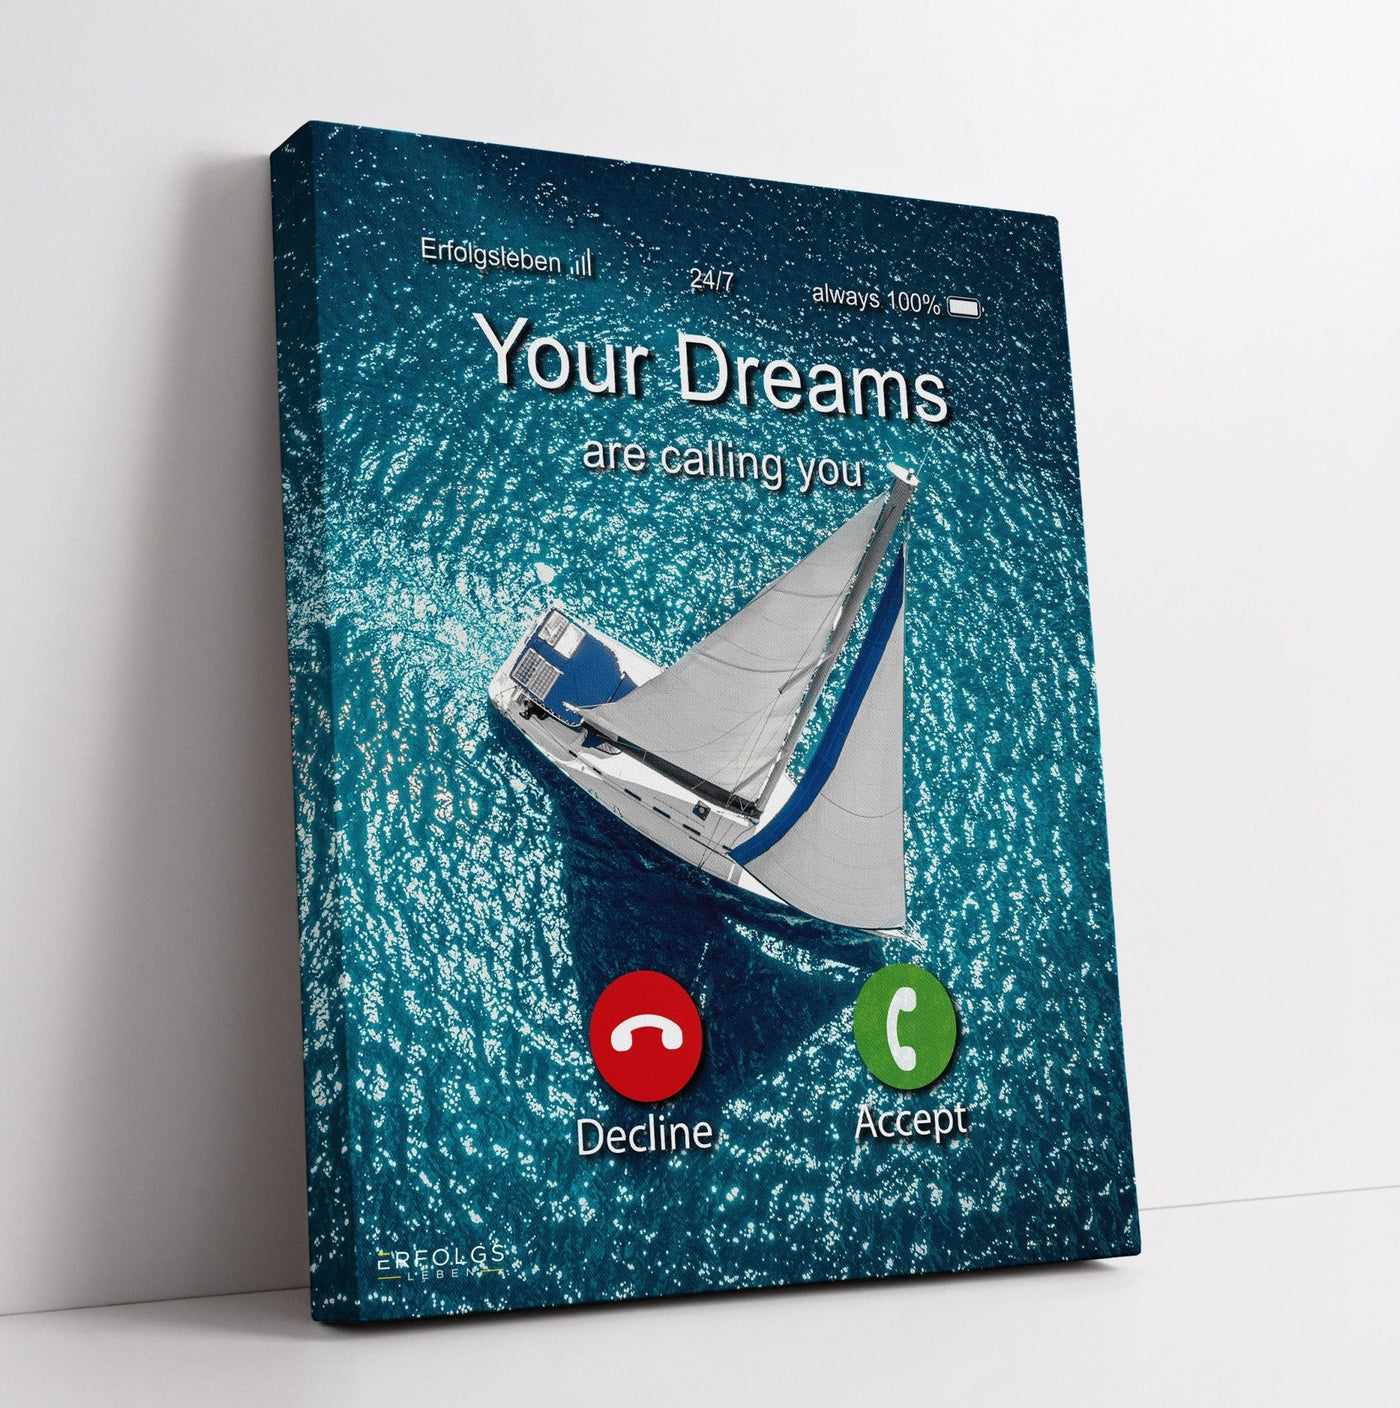 Leinwand - Your Dreams are calling you - Segelyacht - Erfolgsleben